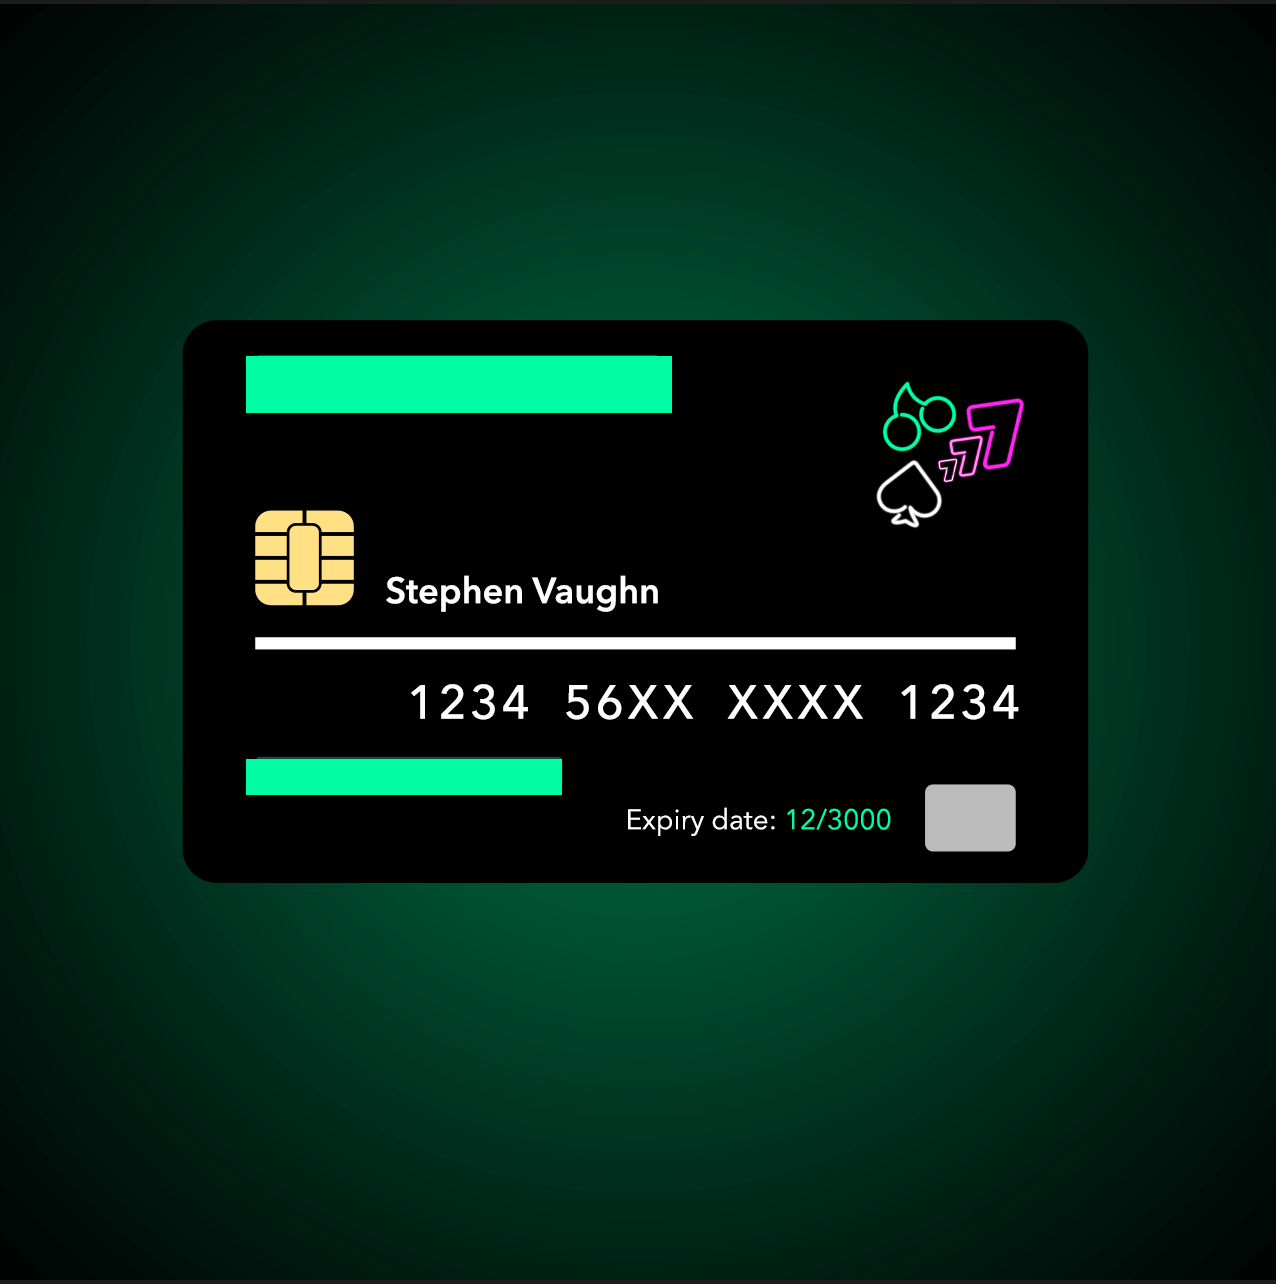 Front of credit card